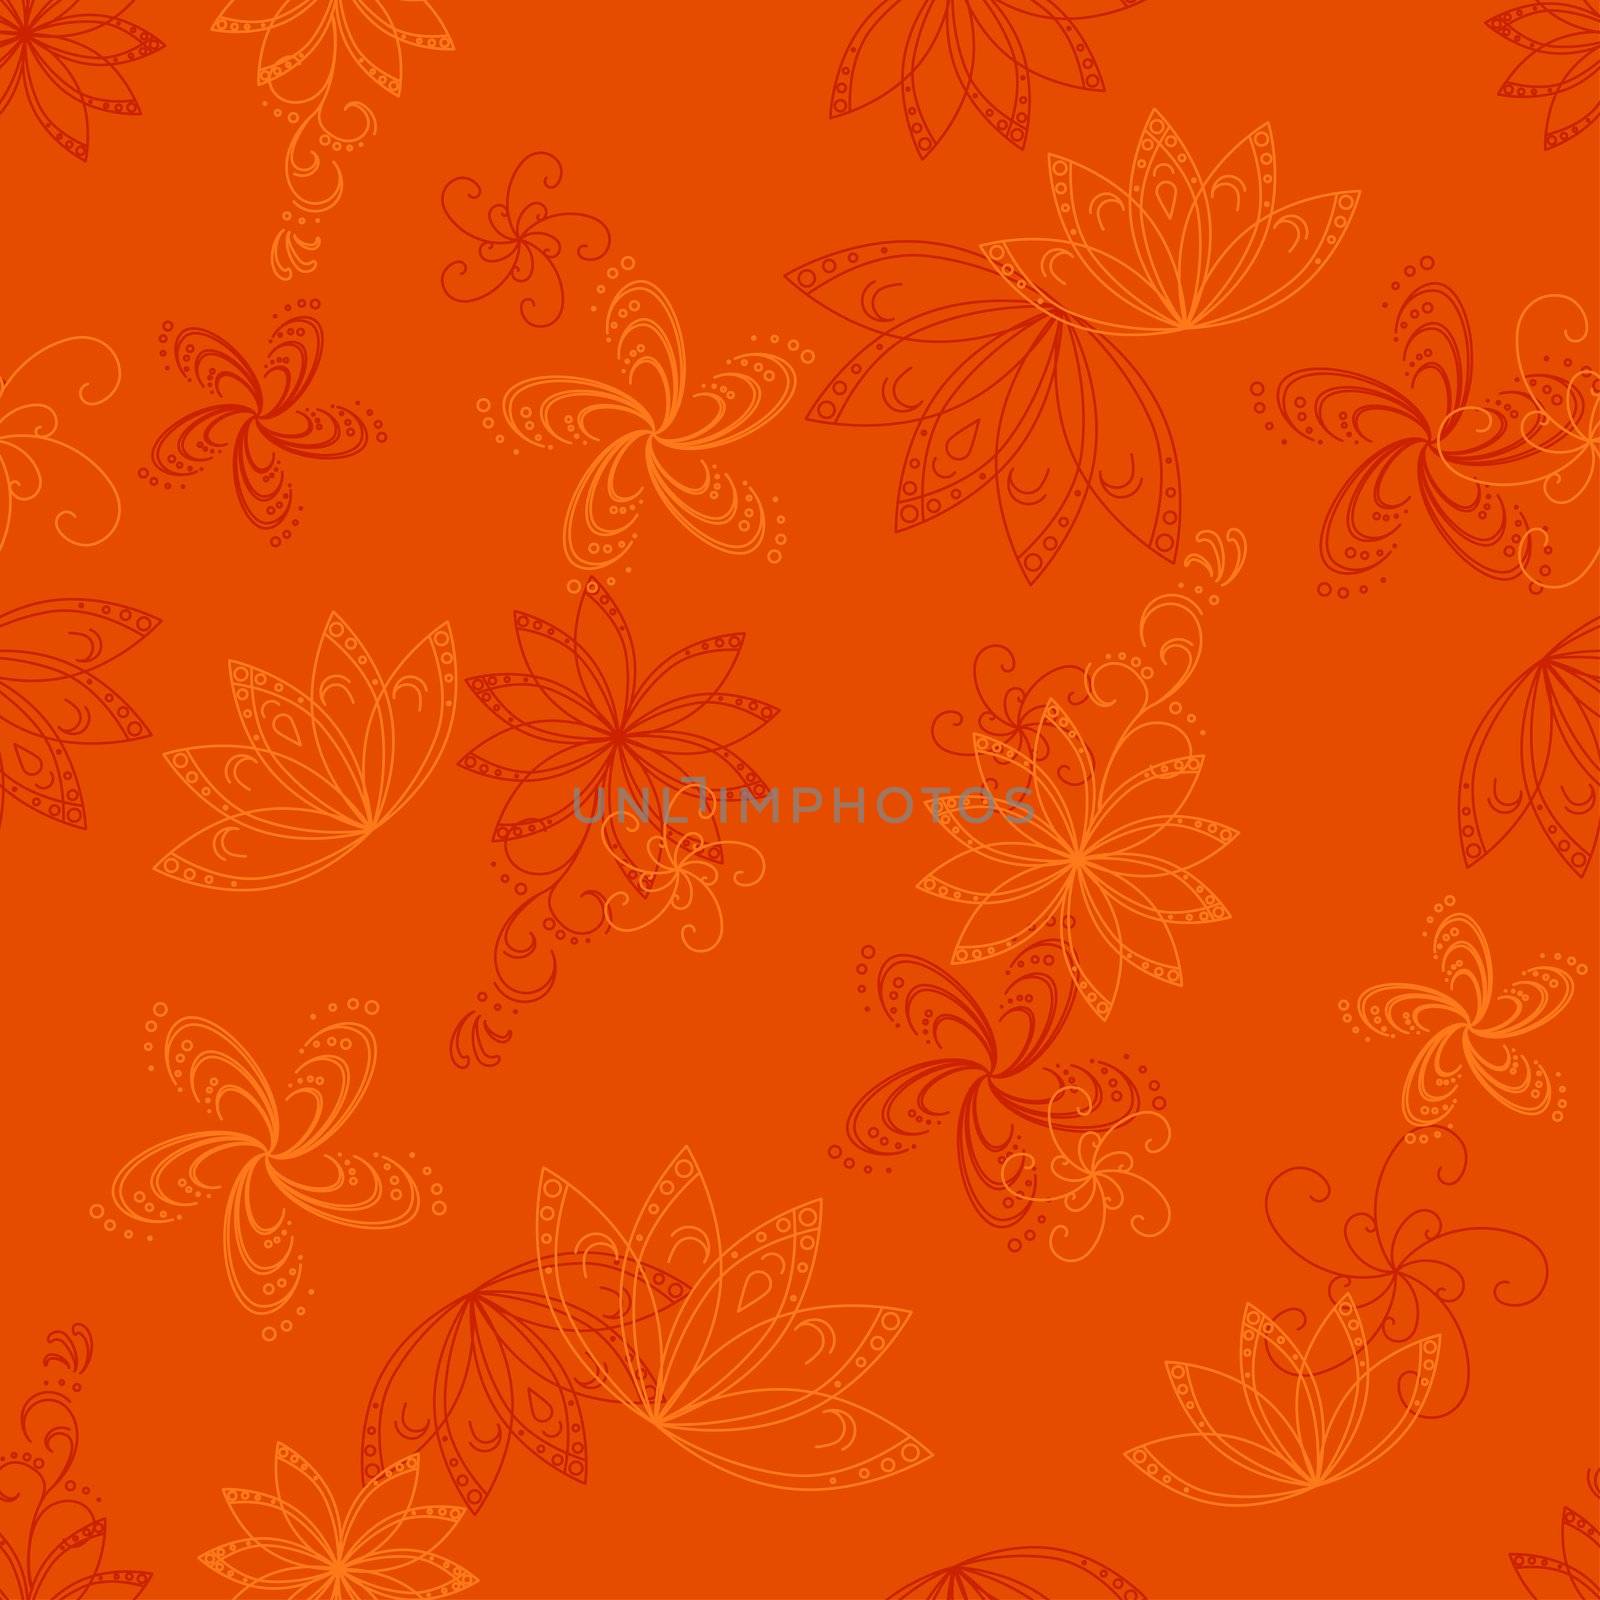 Abstract orange seamless background with graphic floral pattern